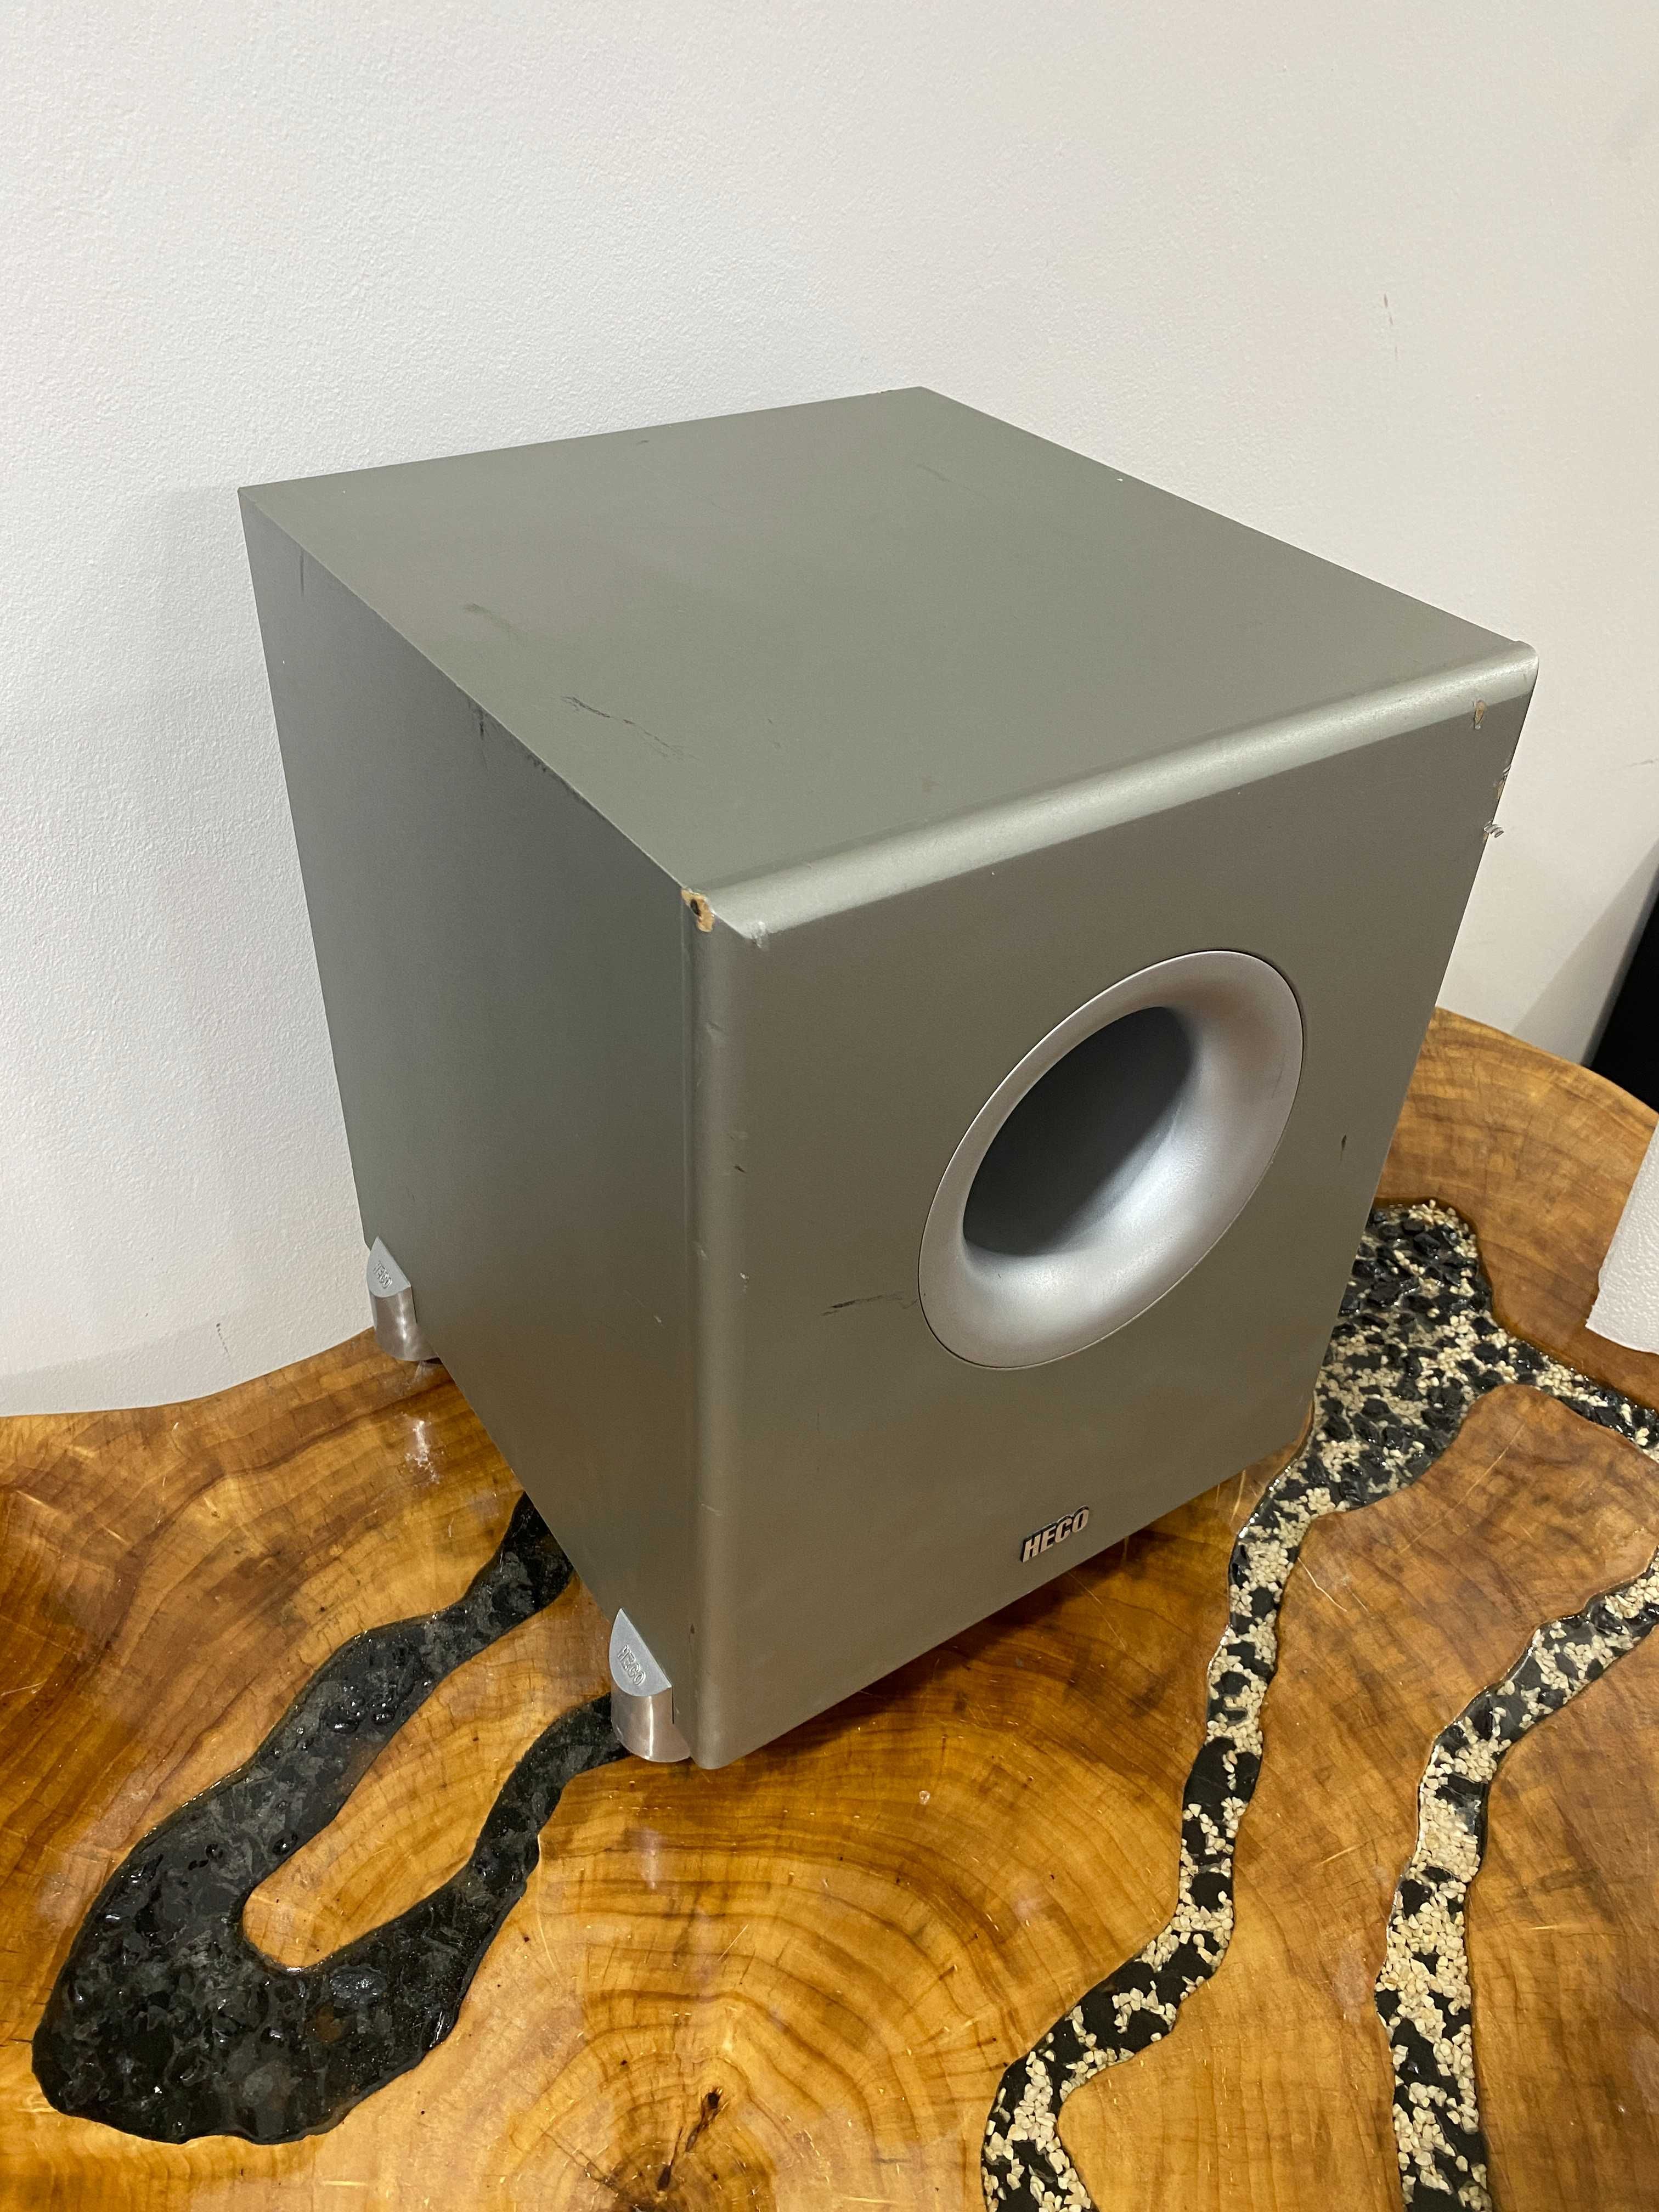 Subwoofer HECO 512A